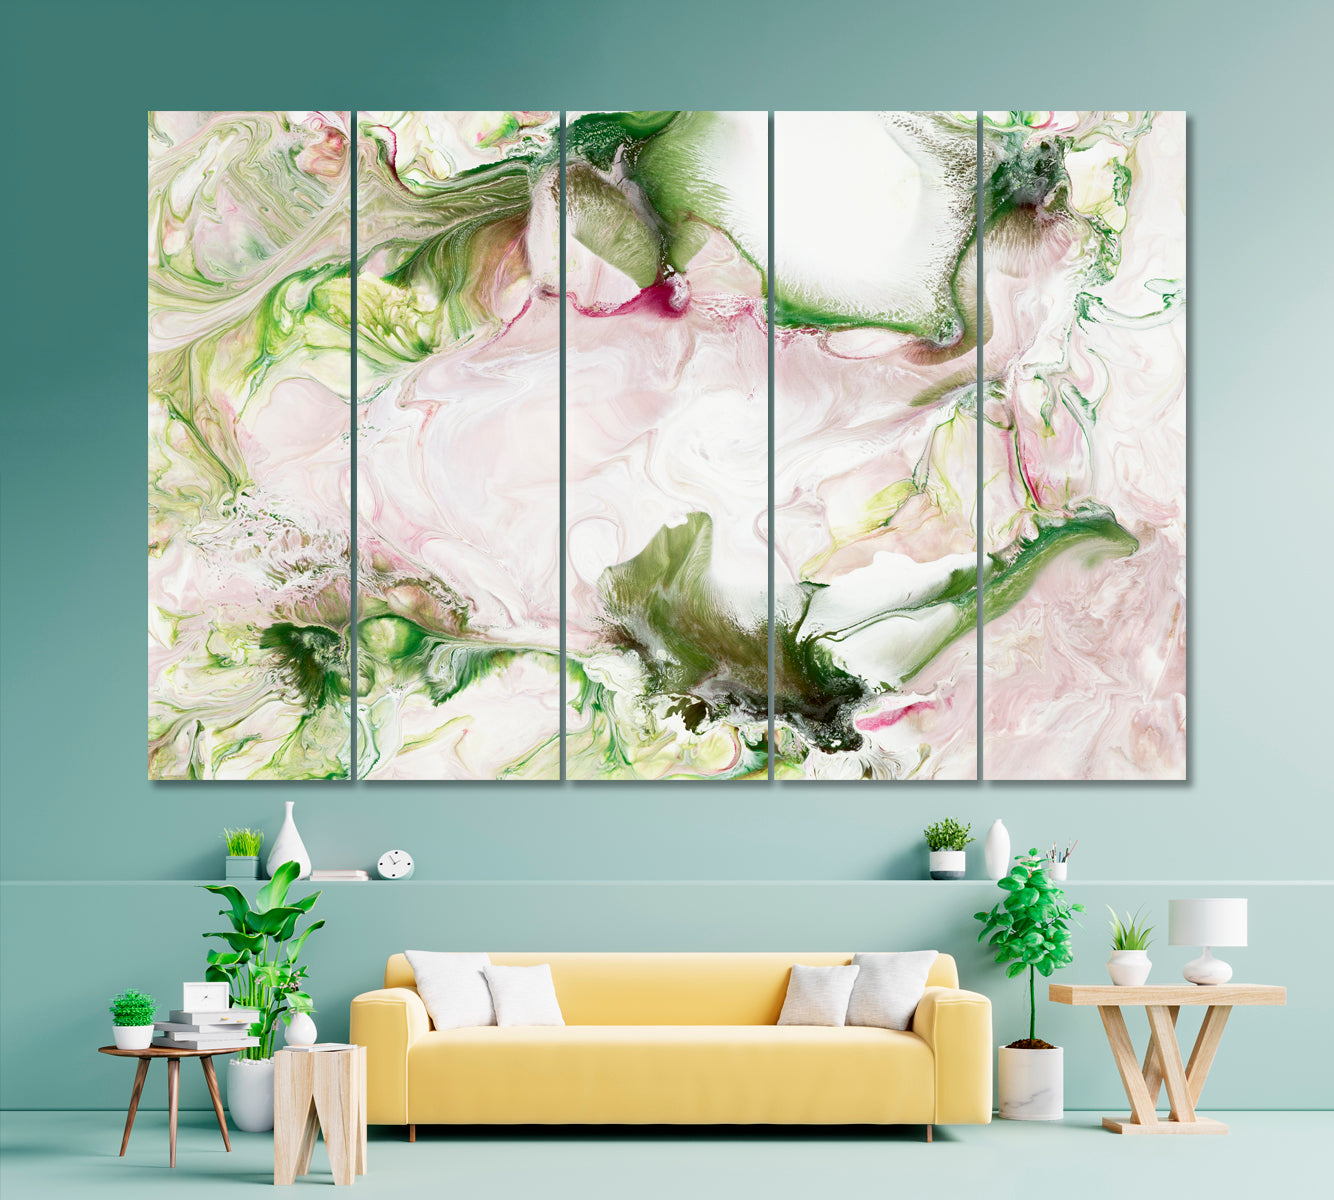 Green and Pink Abstract Composition Canvas Print ArtLexy 5 Panels 36"x24" inches 